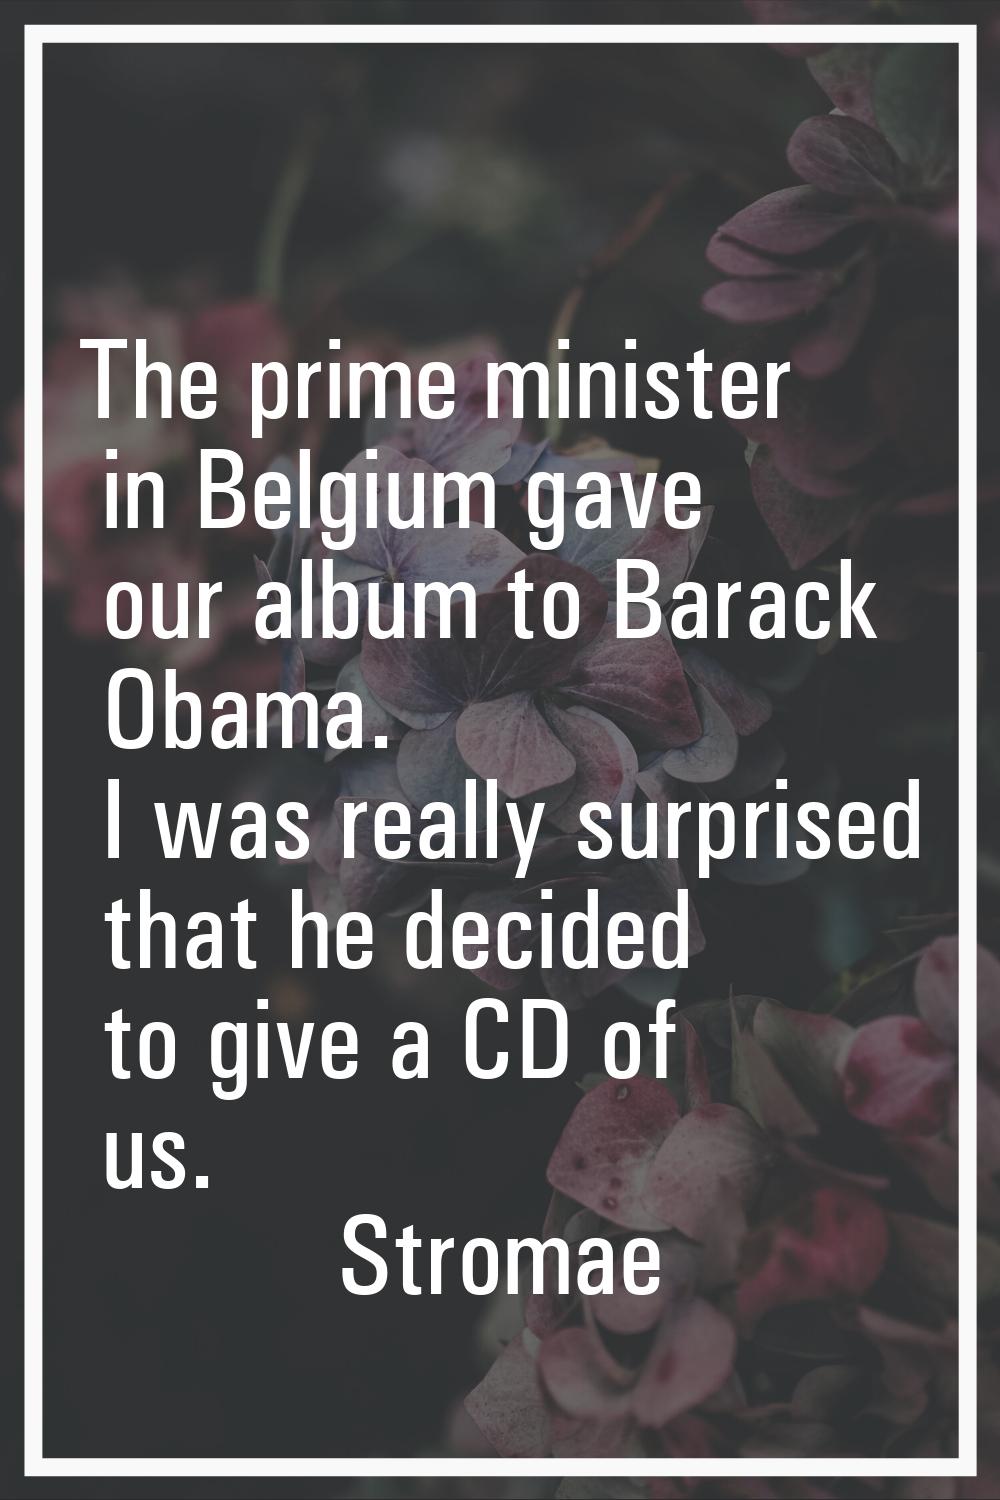 The prime minister in Belgium gave our album to Barack Obama. I was really surprised that he decide